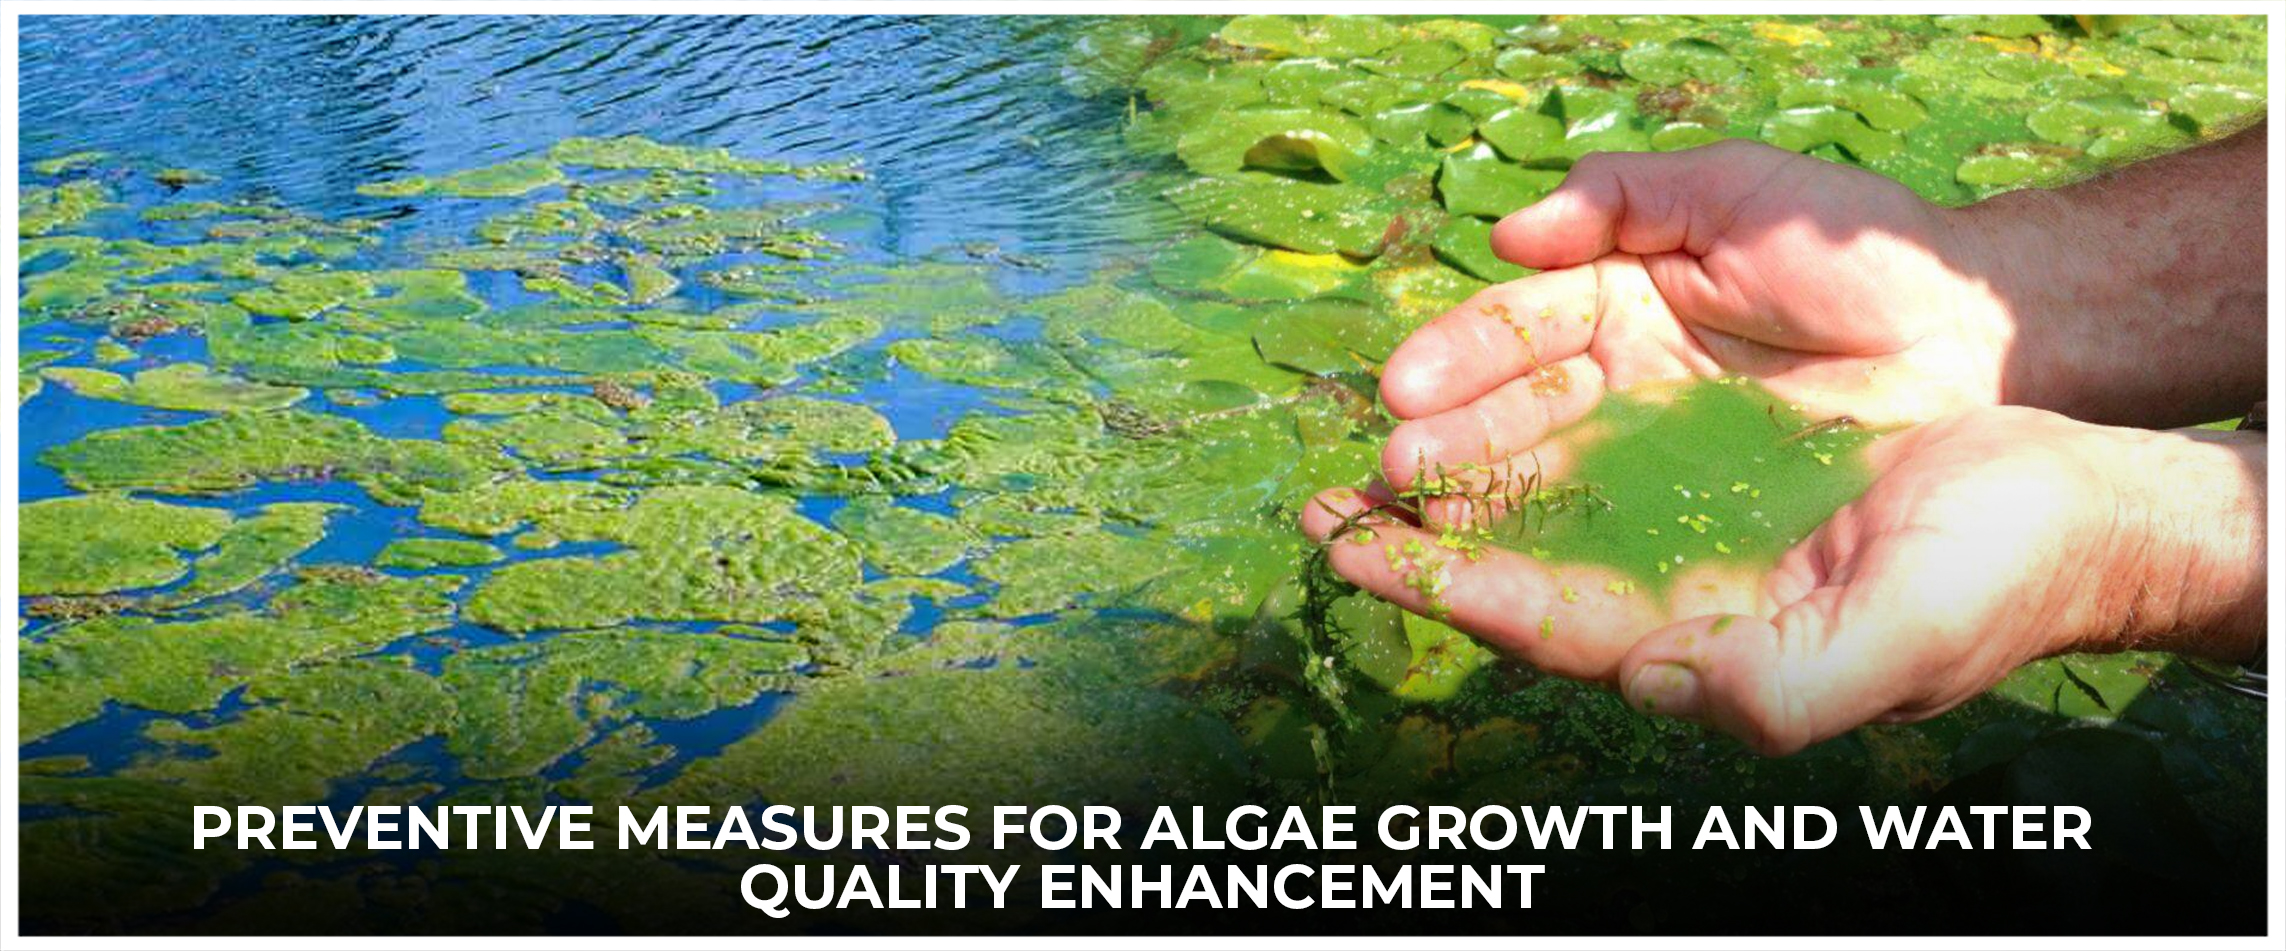 Preventive Measures for Algae Growth and Water Quality Enhancement